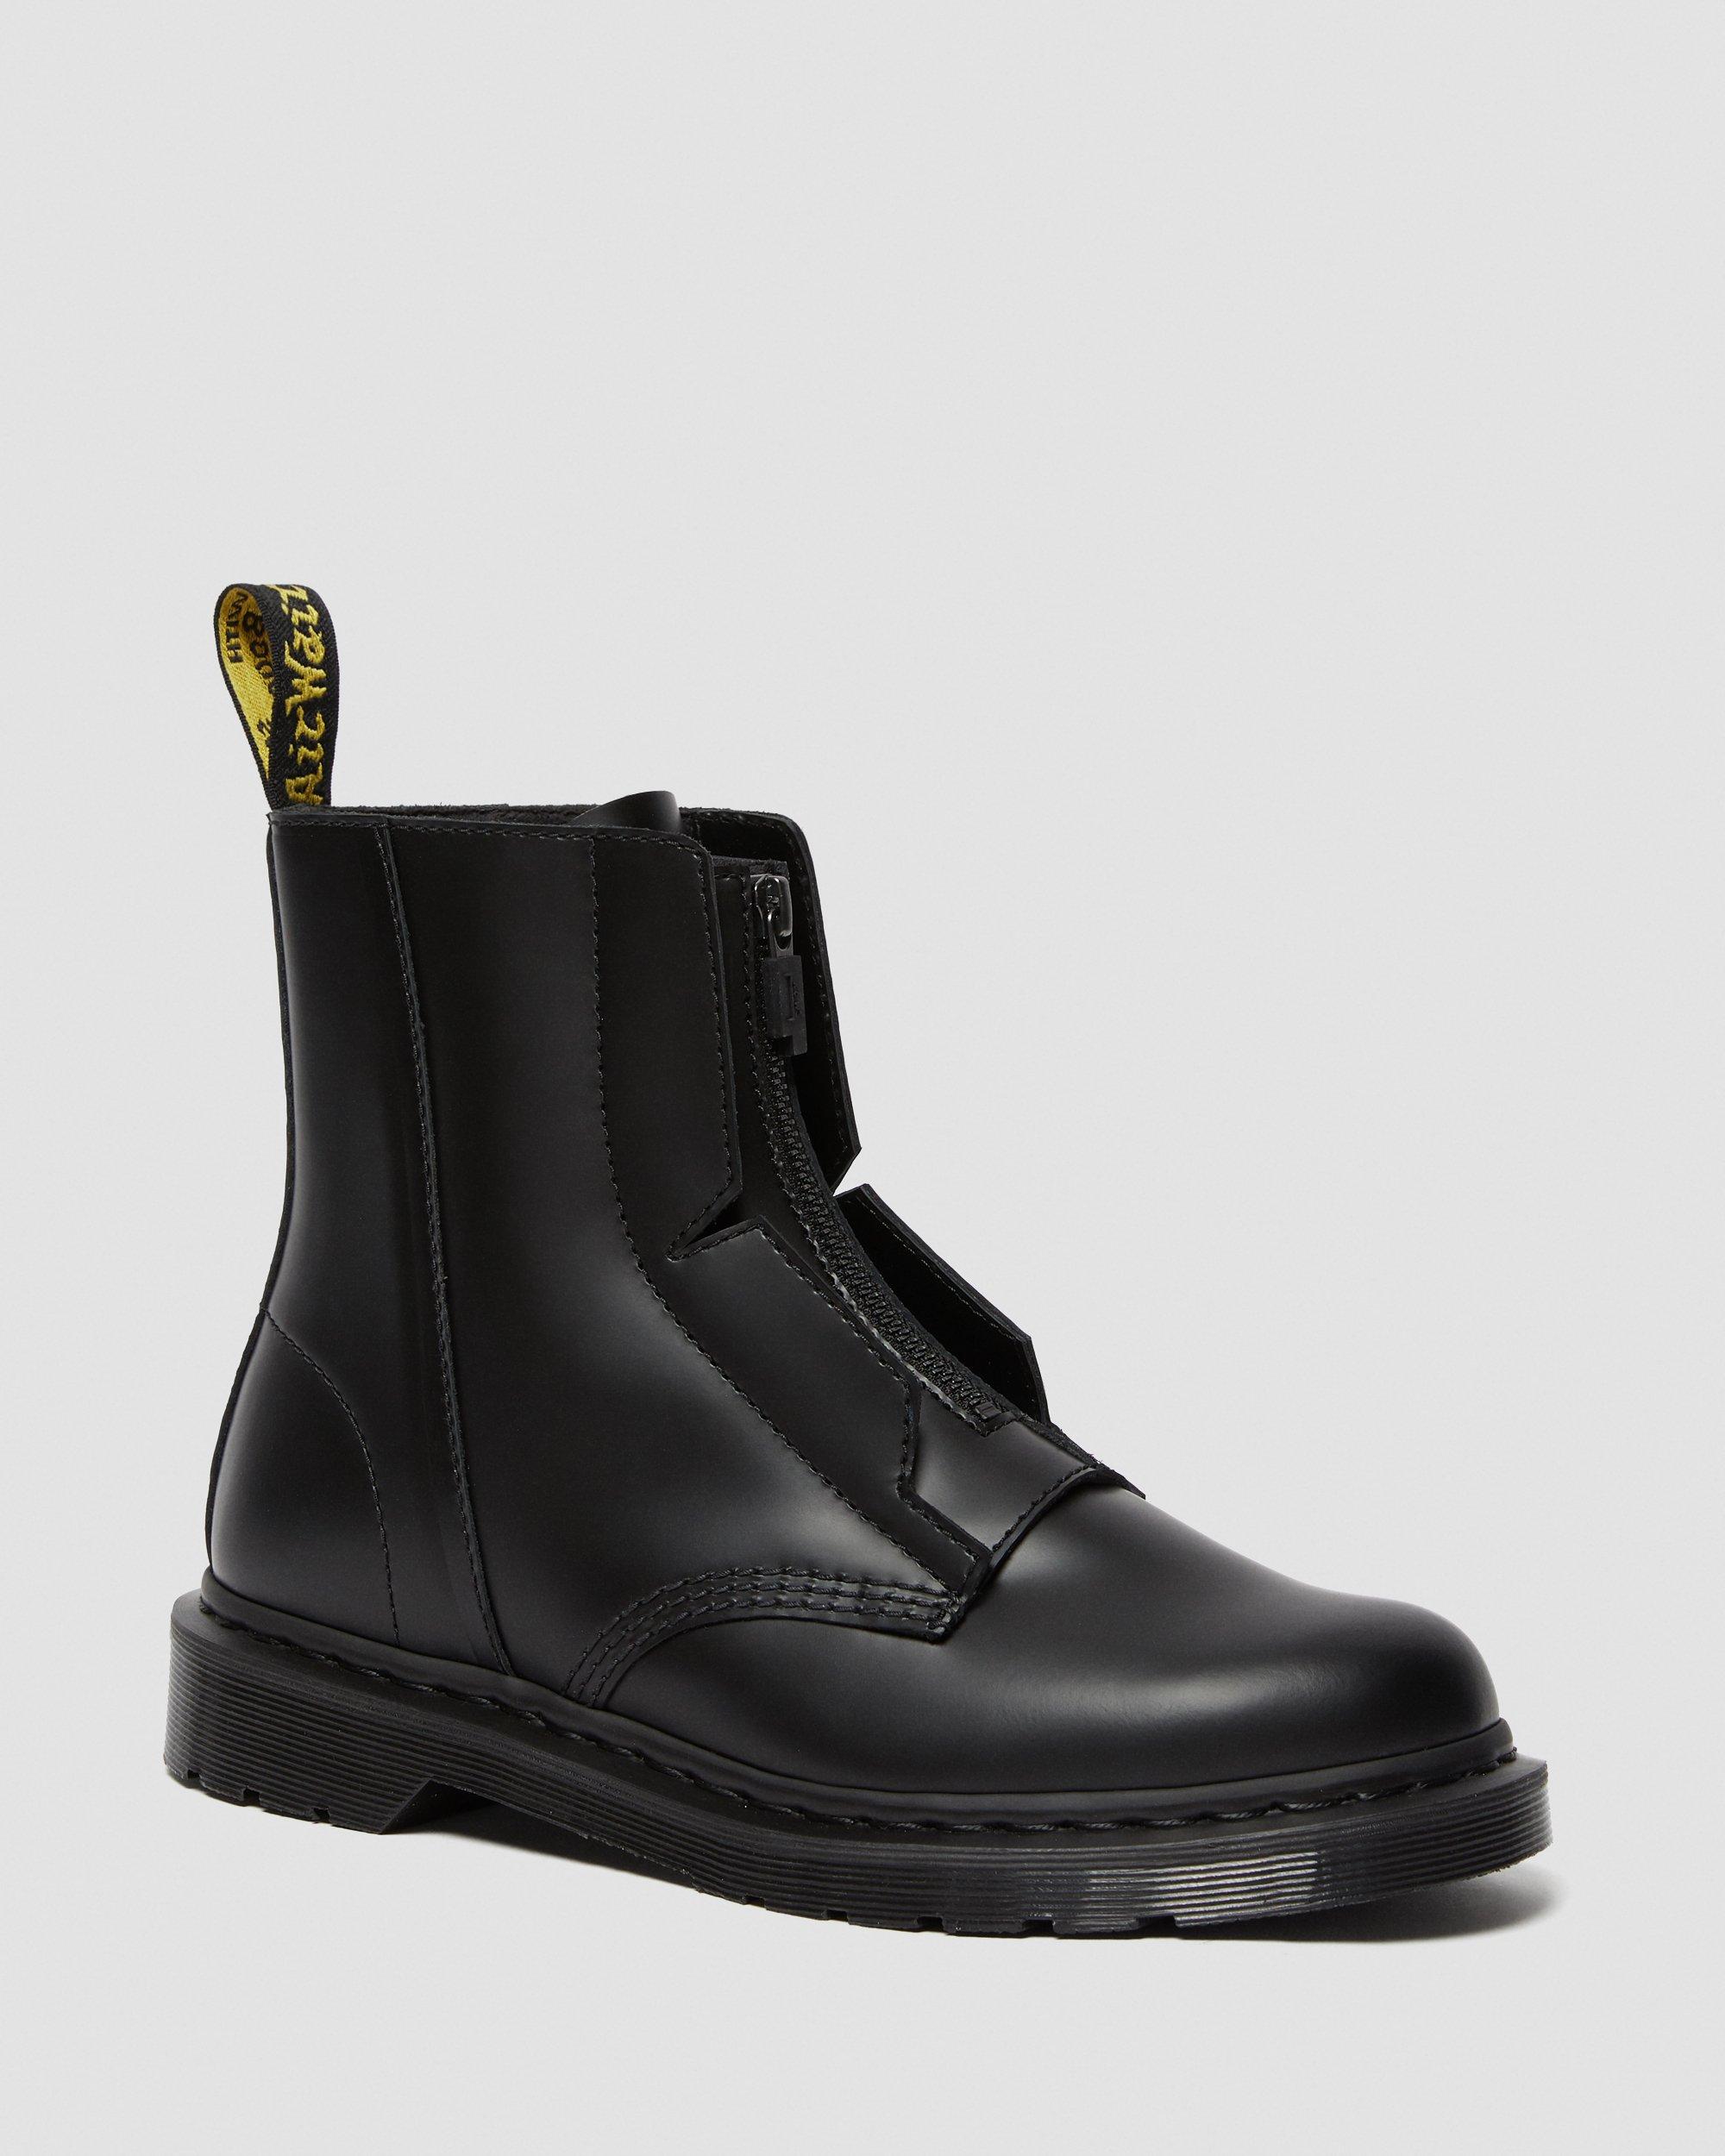 27cm A-COLD-WALL Dr. Martens 1460 Boot-